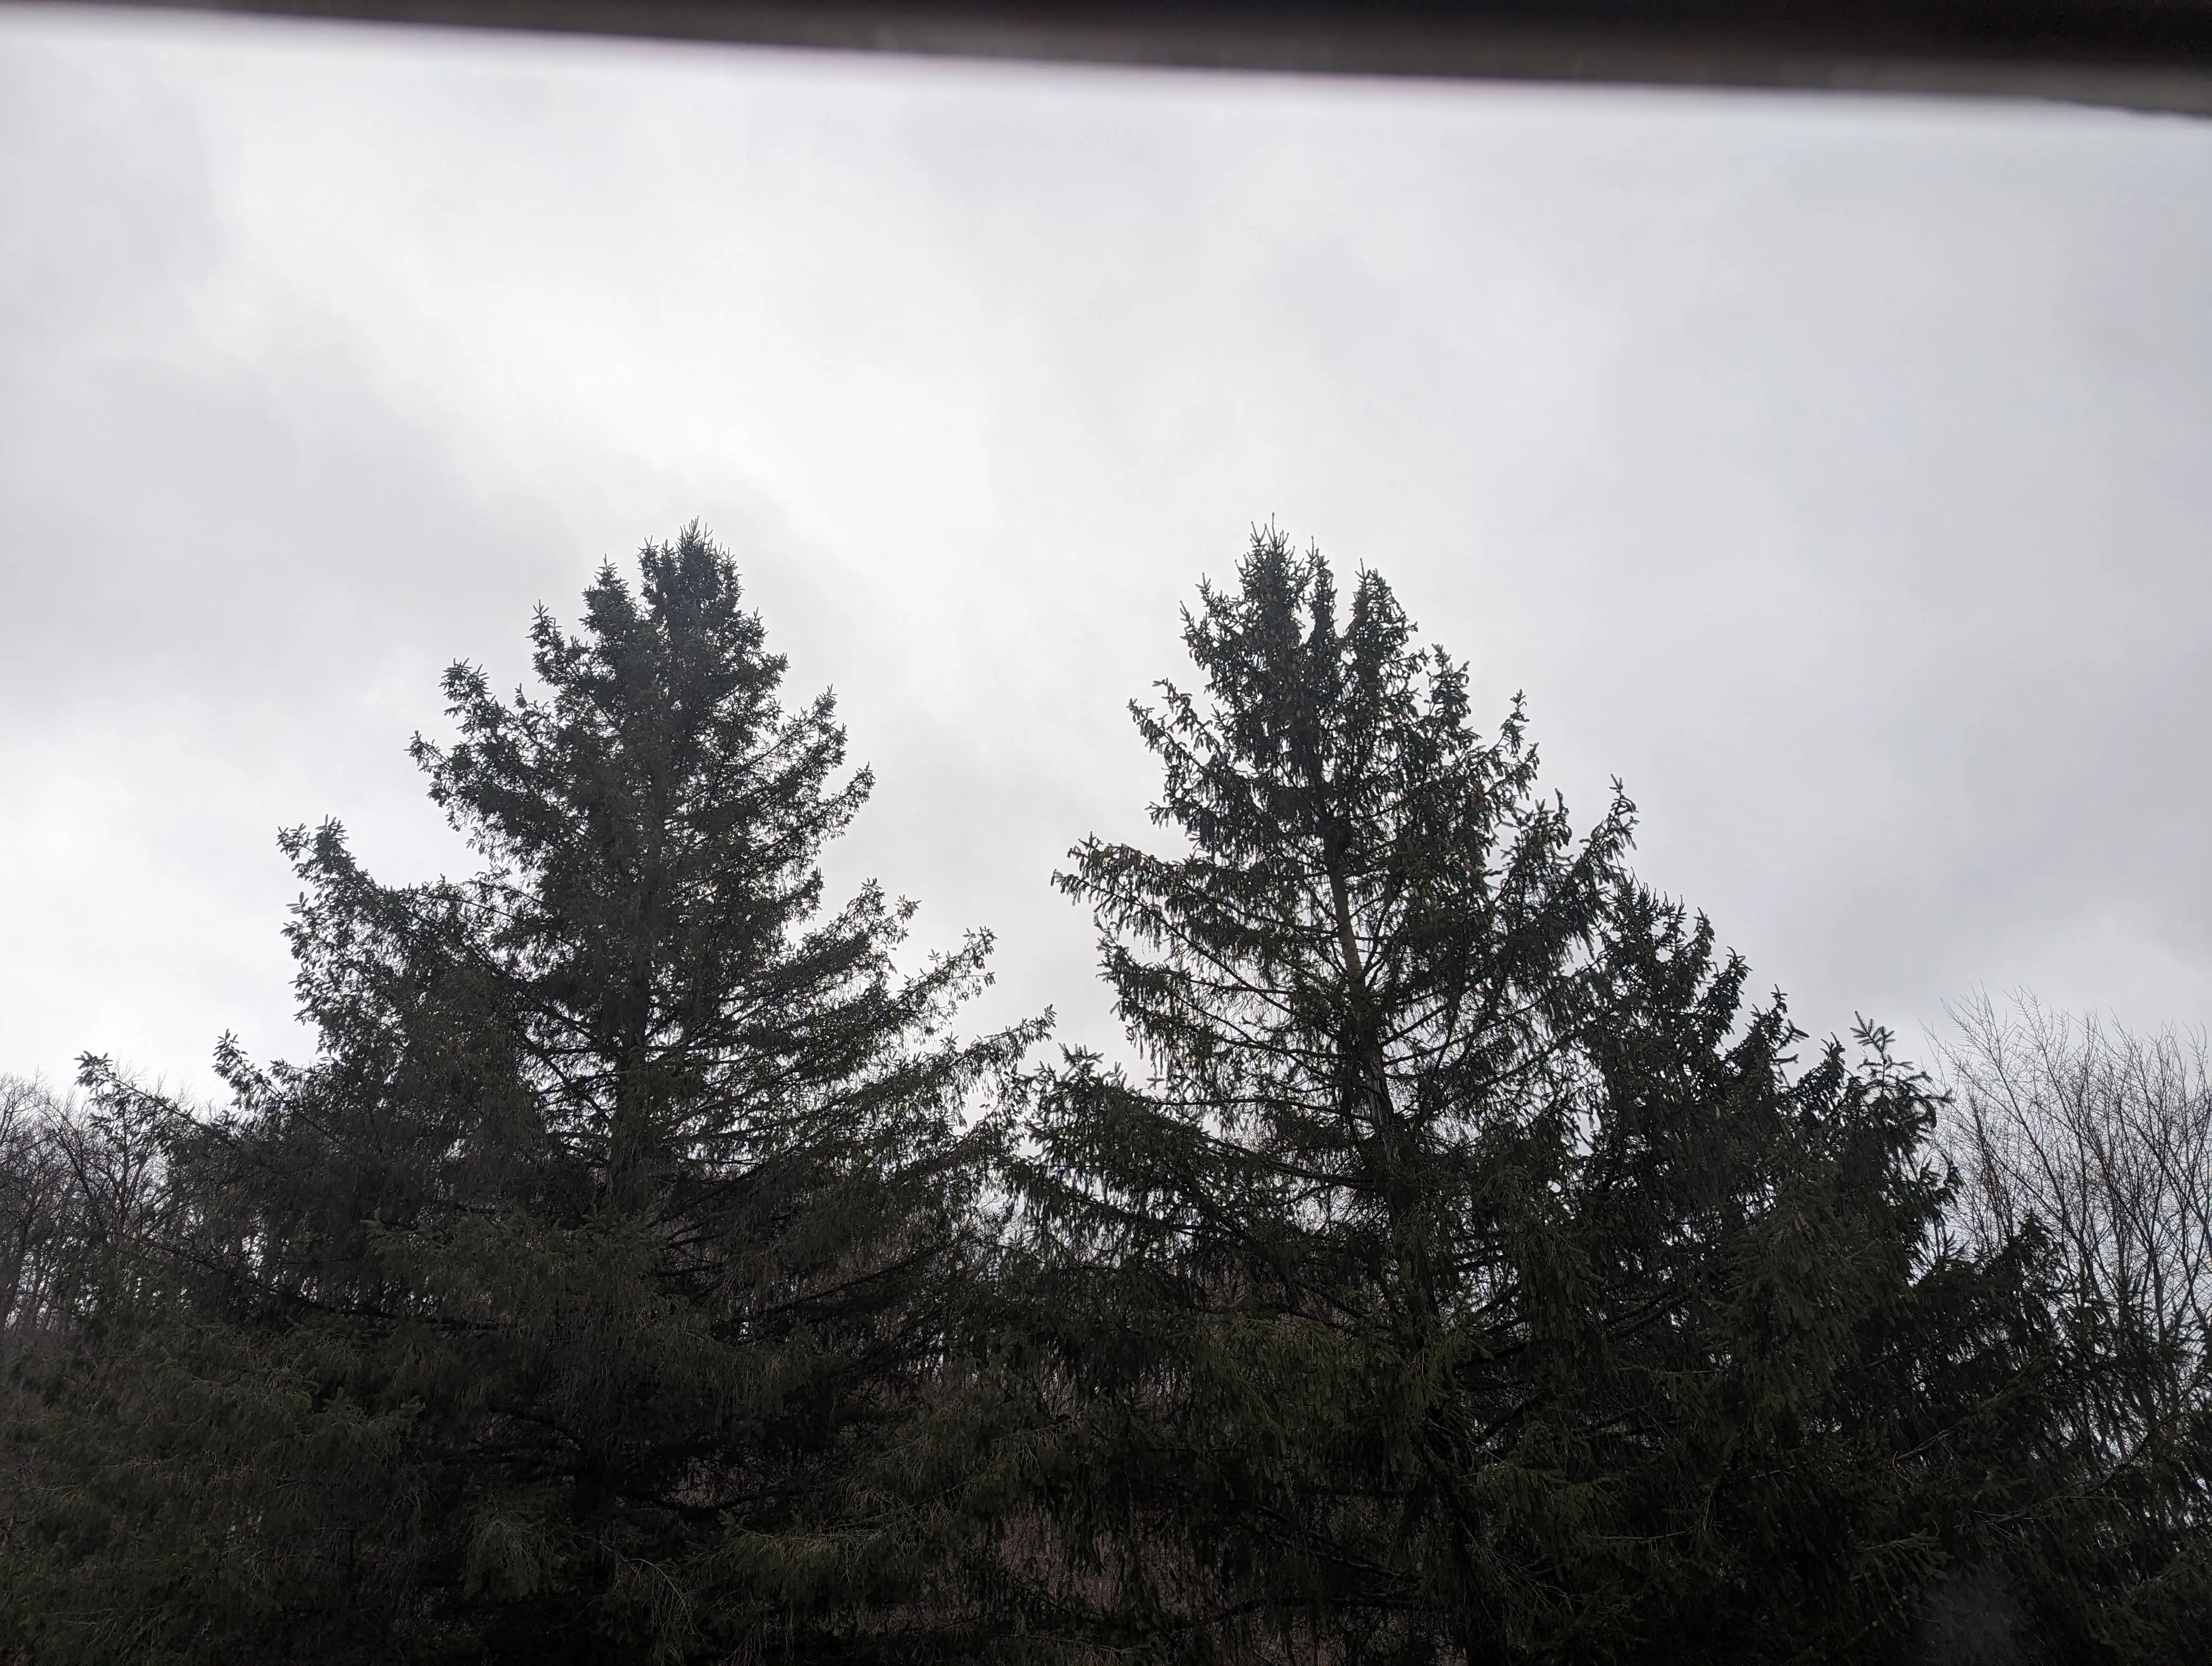 An image of two trees with an overcast sky behind them